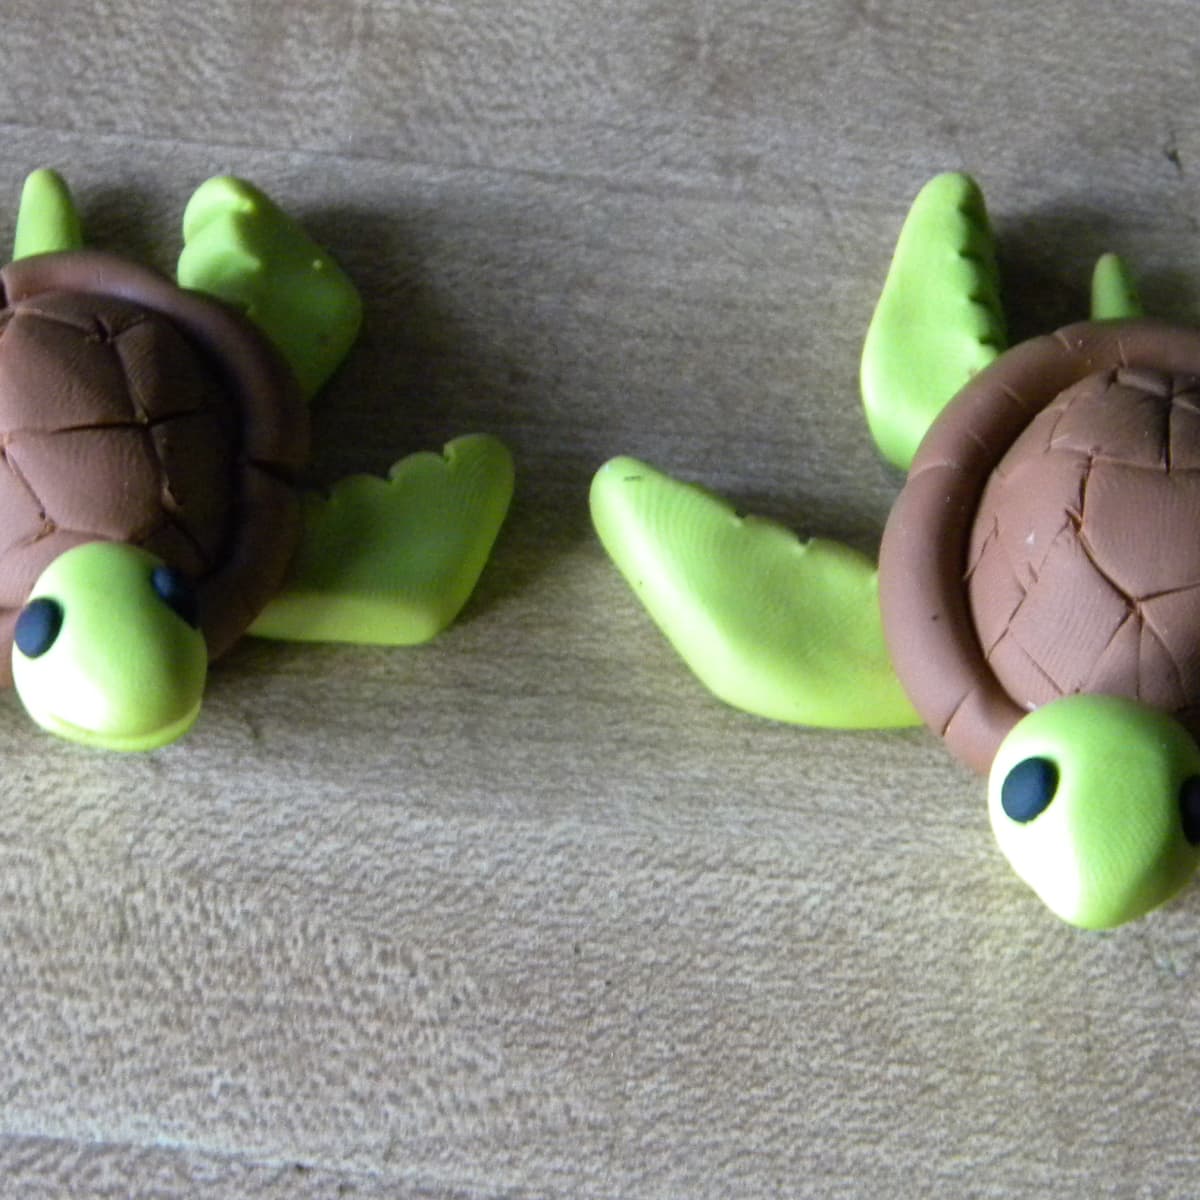 How to Make a Clay Turtle (Easy Step-by-Step Instructions) - FeltMagnet